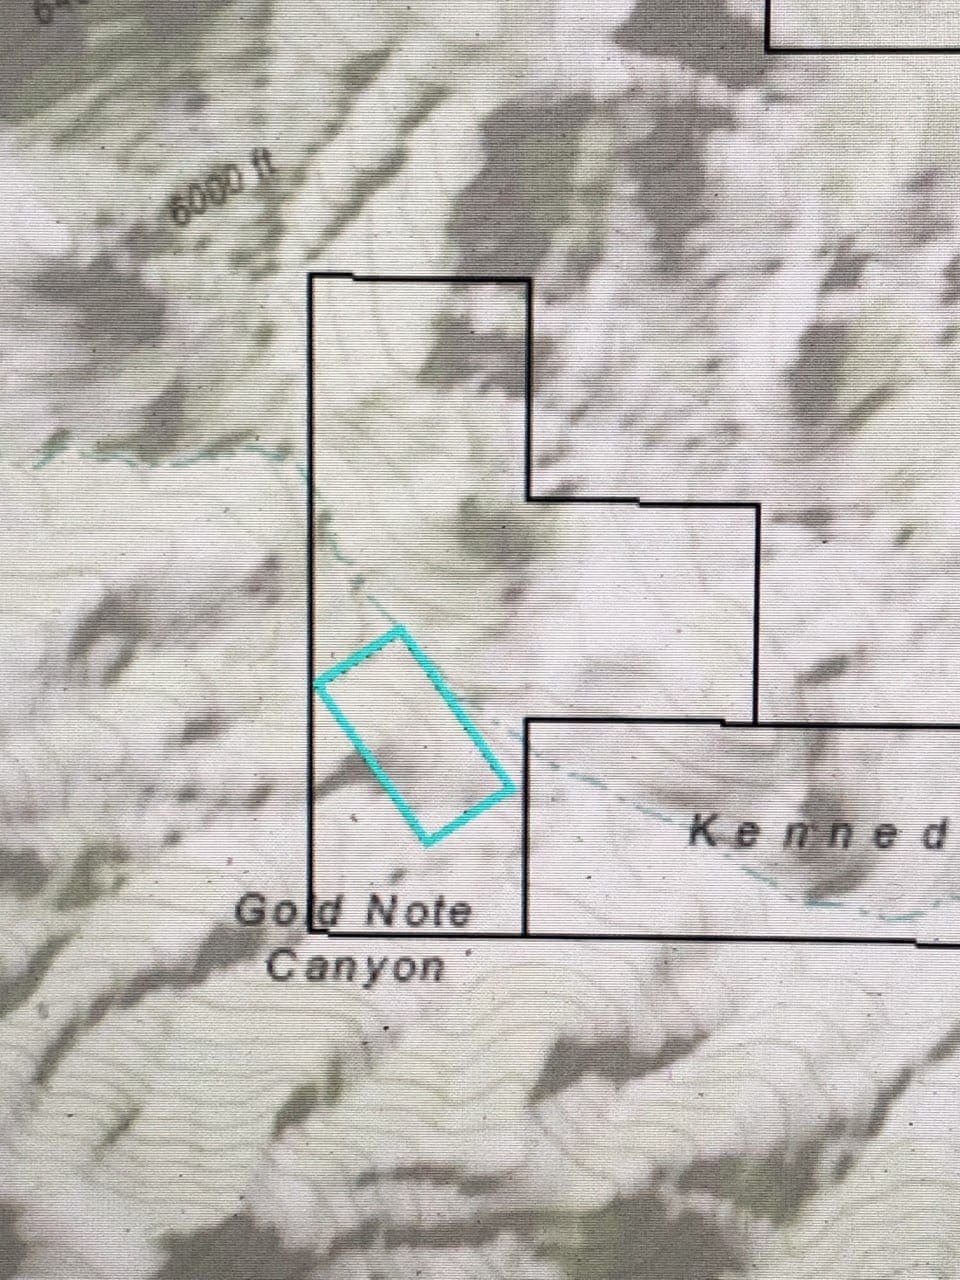 15.84 Acres in GOLD NOTE CANYON, HIDDEN TREASURE #1, SUR 2097 – A PATENTED MINING CLAIM -PAST PRODUCER OF GOLD, SILVER & ZINC photo 45